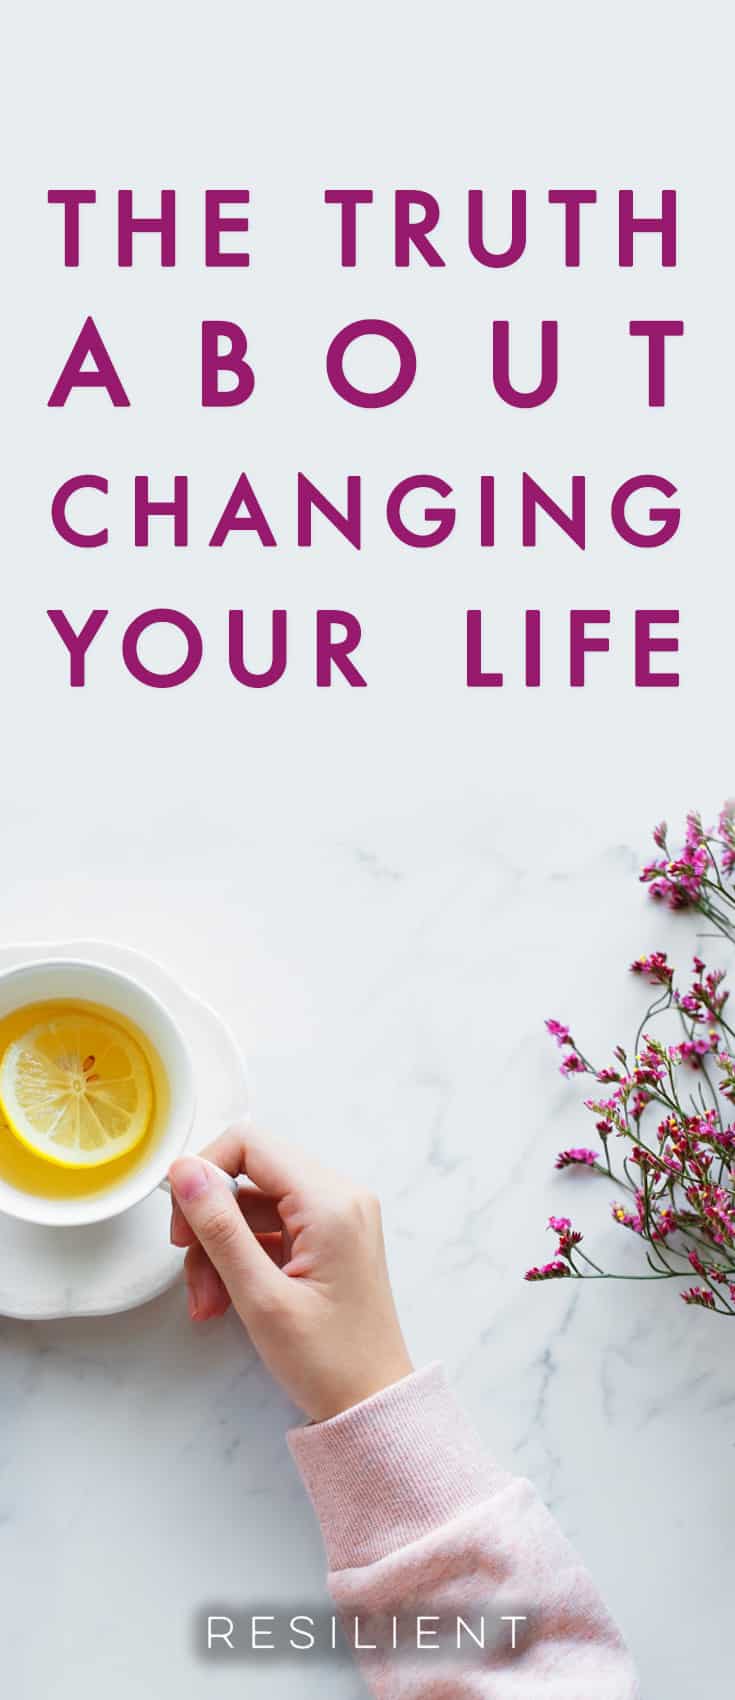 Changing your life is easy in theory and much more difficult in practice. But there's one truth that can change your whole perspective on making changes in your life. Here's the truth about changing your life.